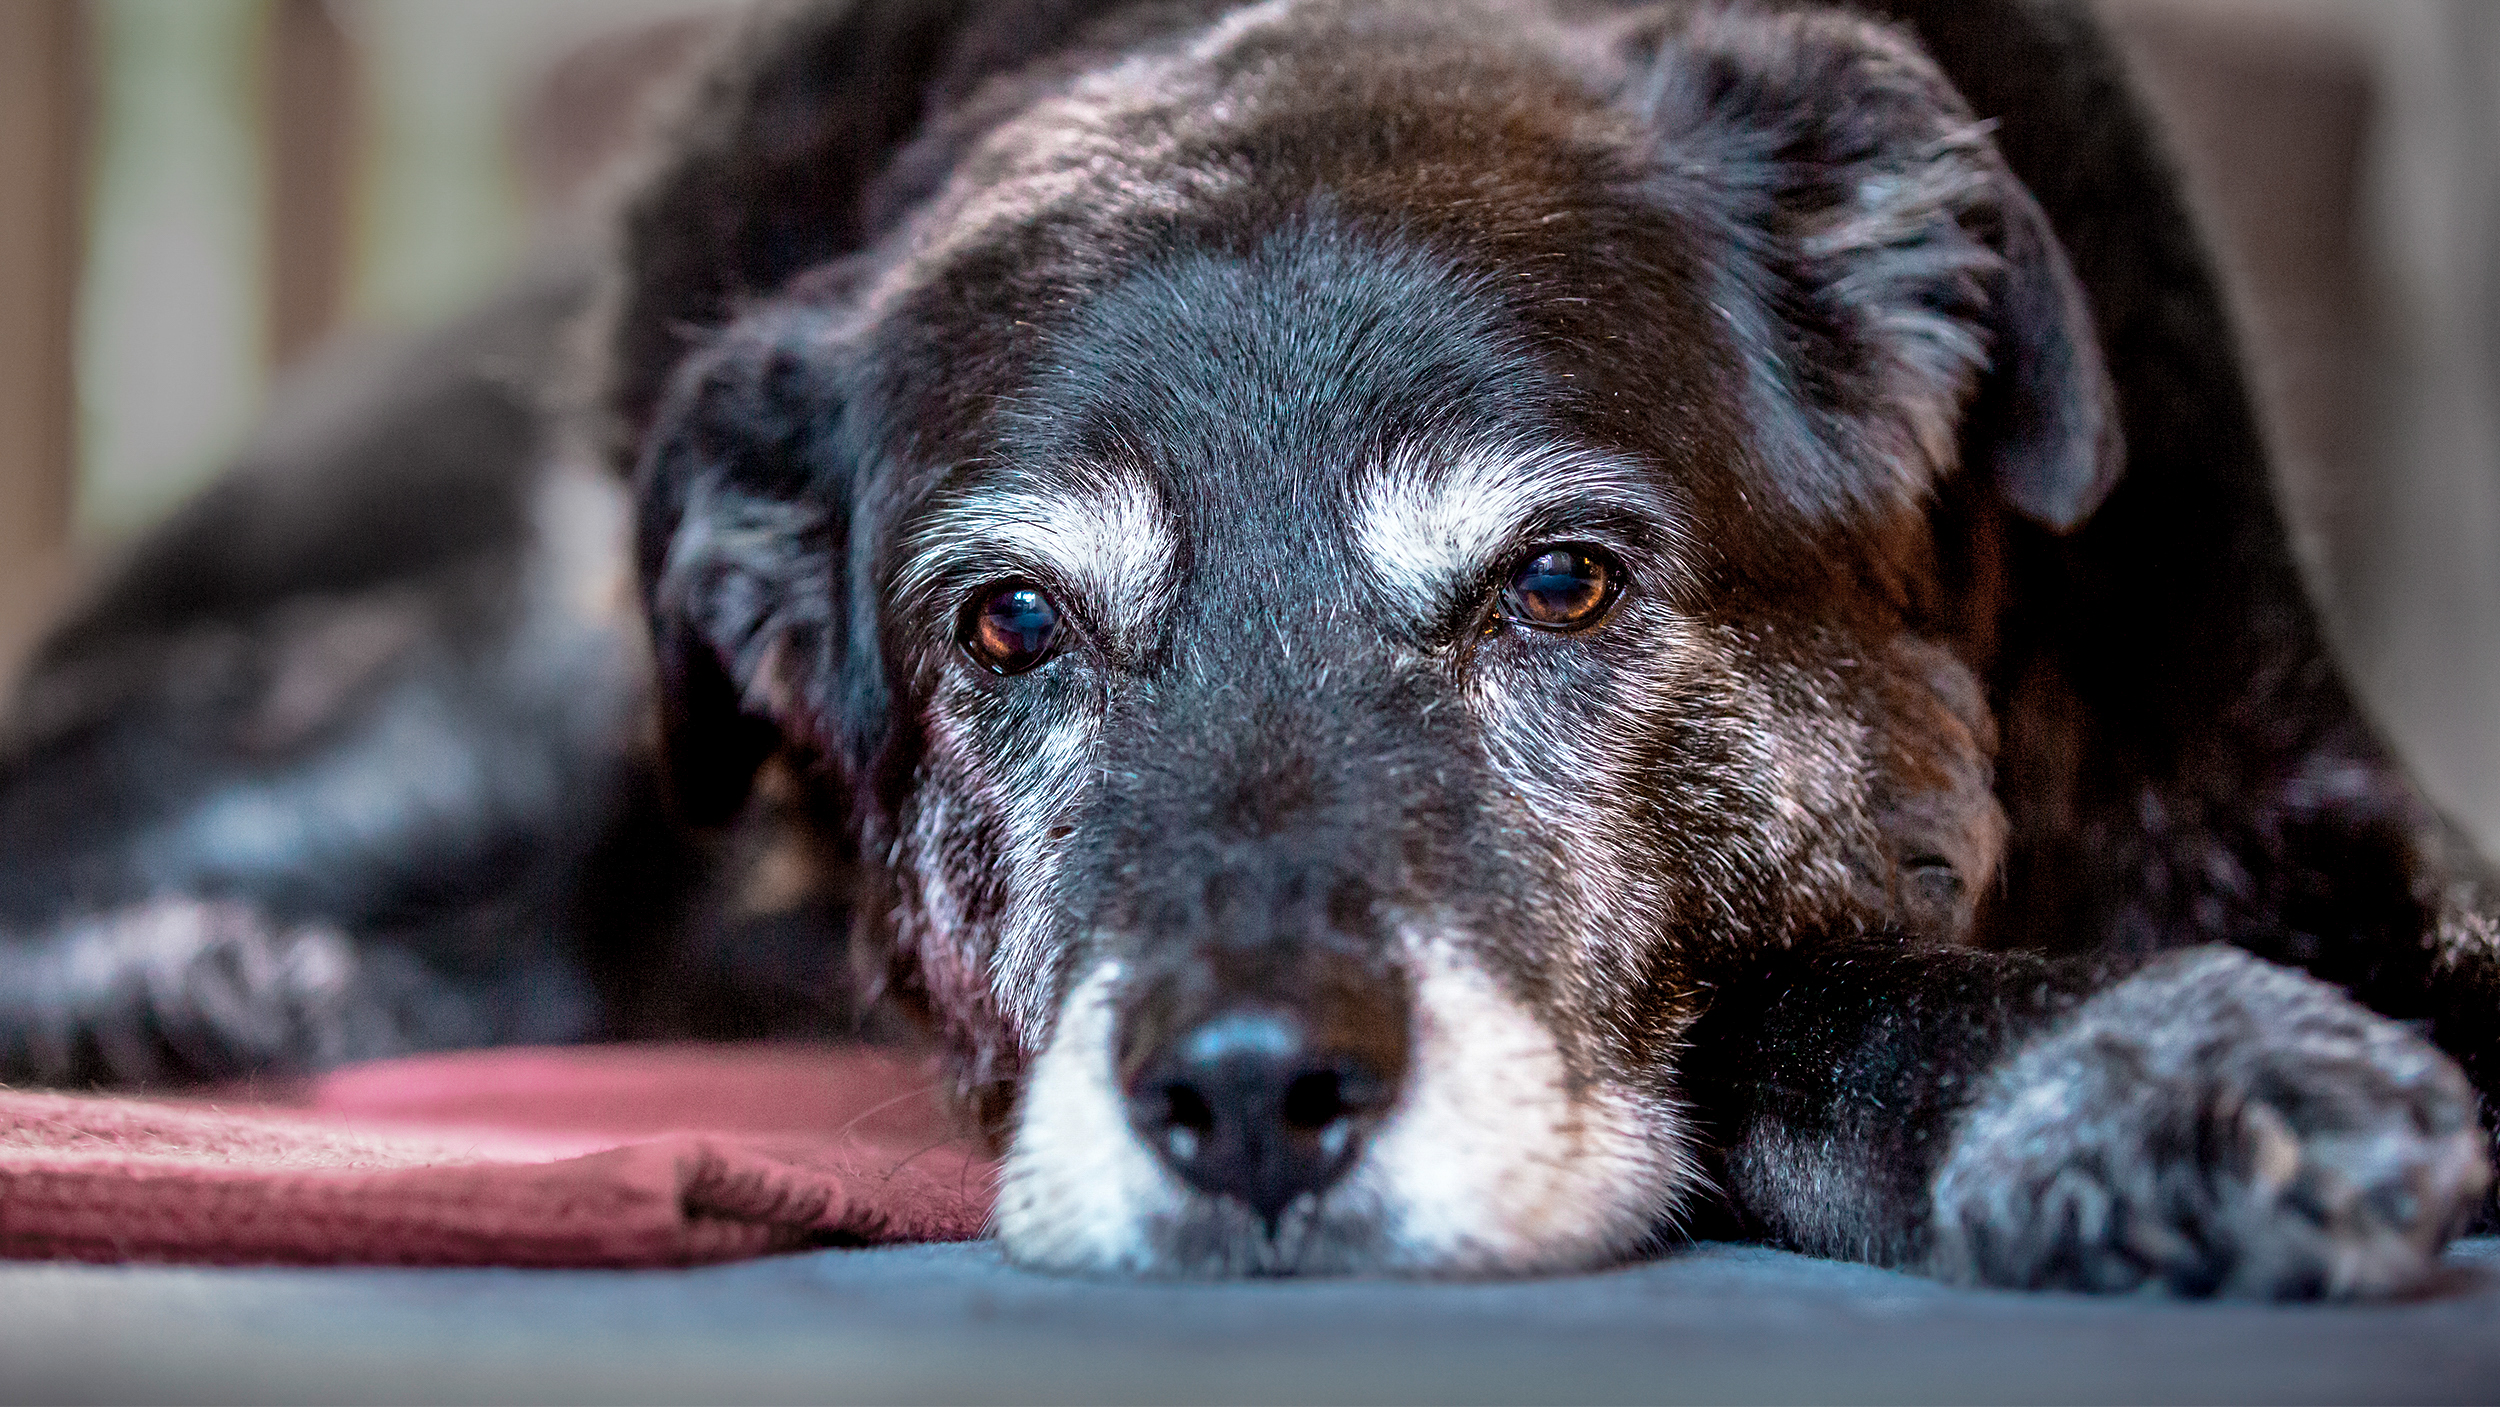 Aging dog lying down indoors on a red blanket.